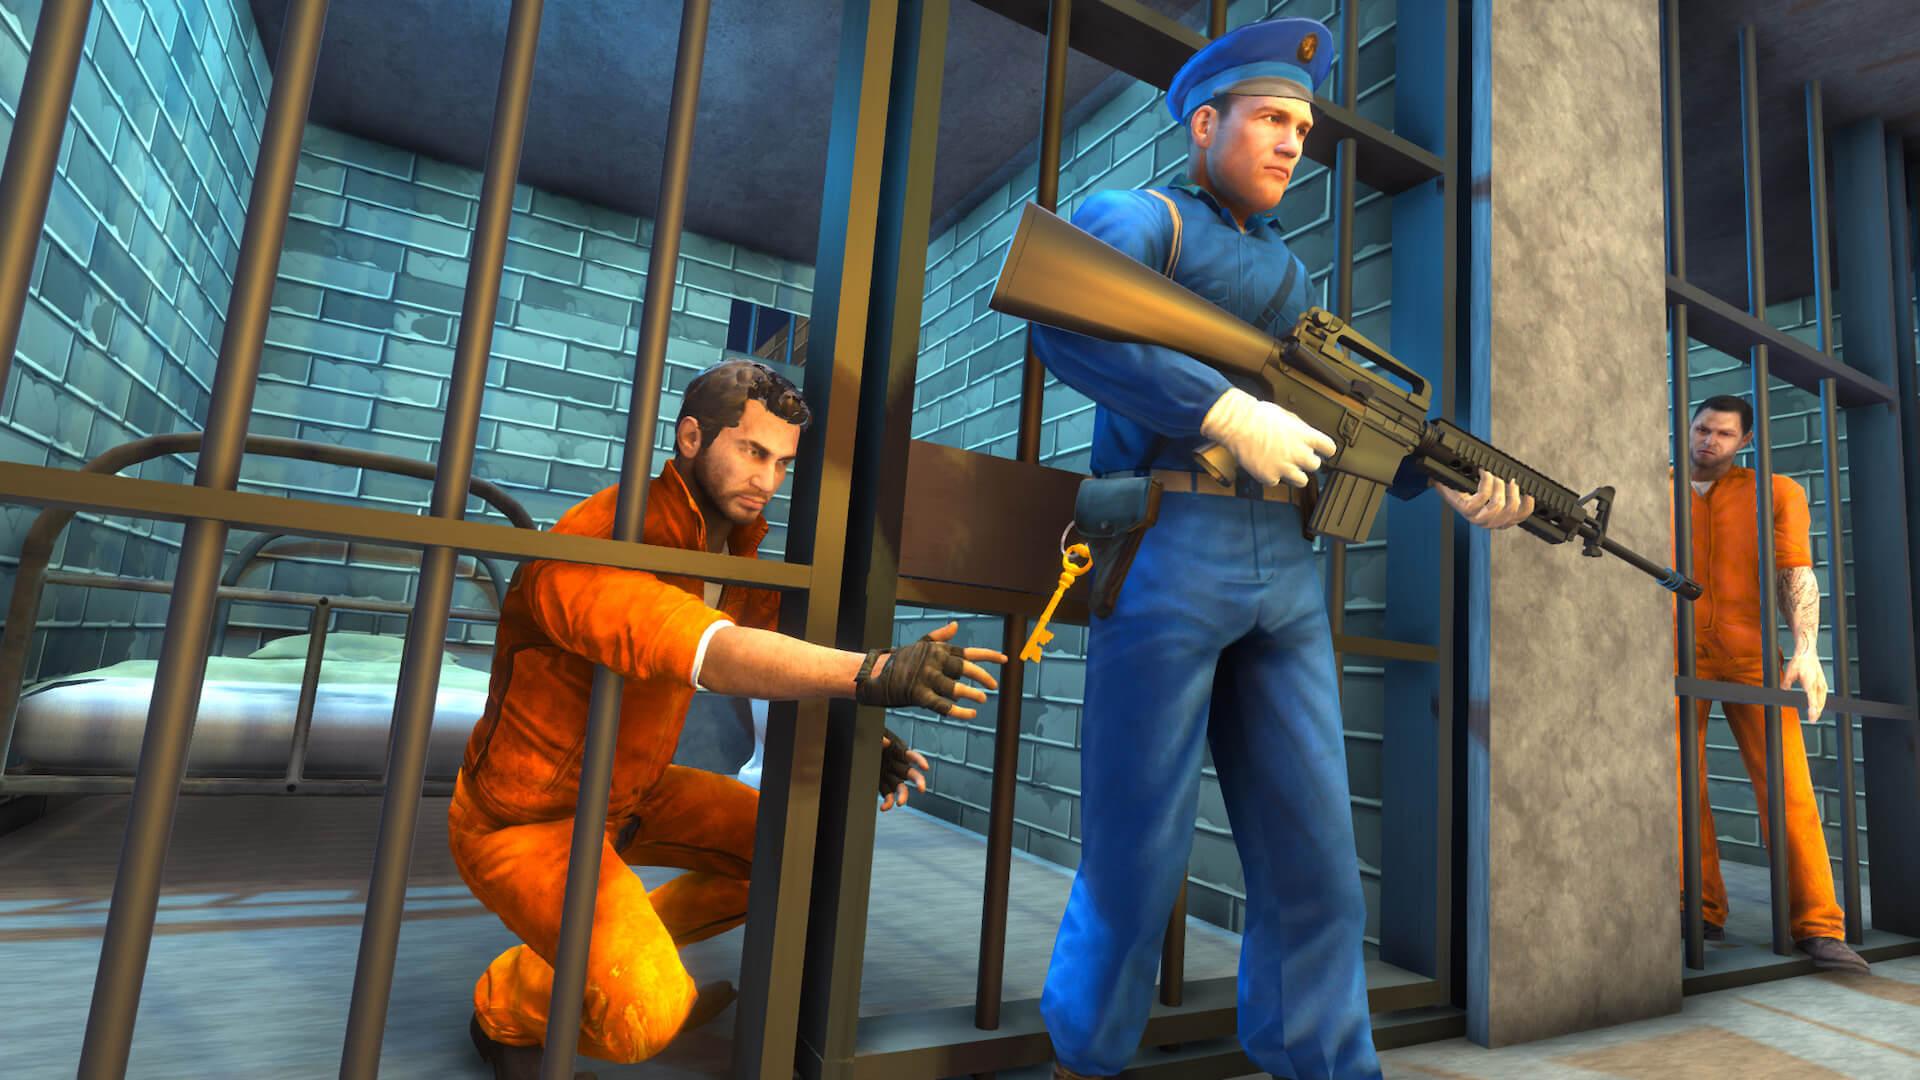 Play Prison Escape- Jail Break Game Online for Free on PC & Mobile